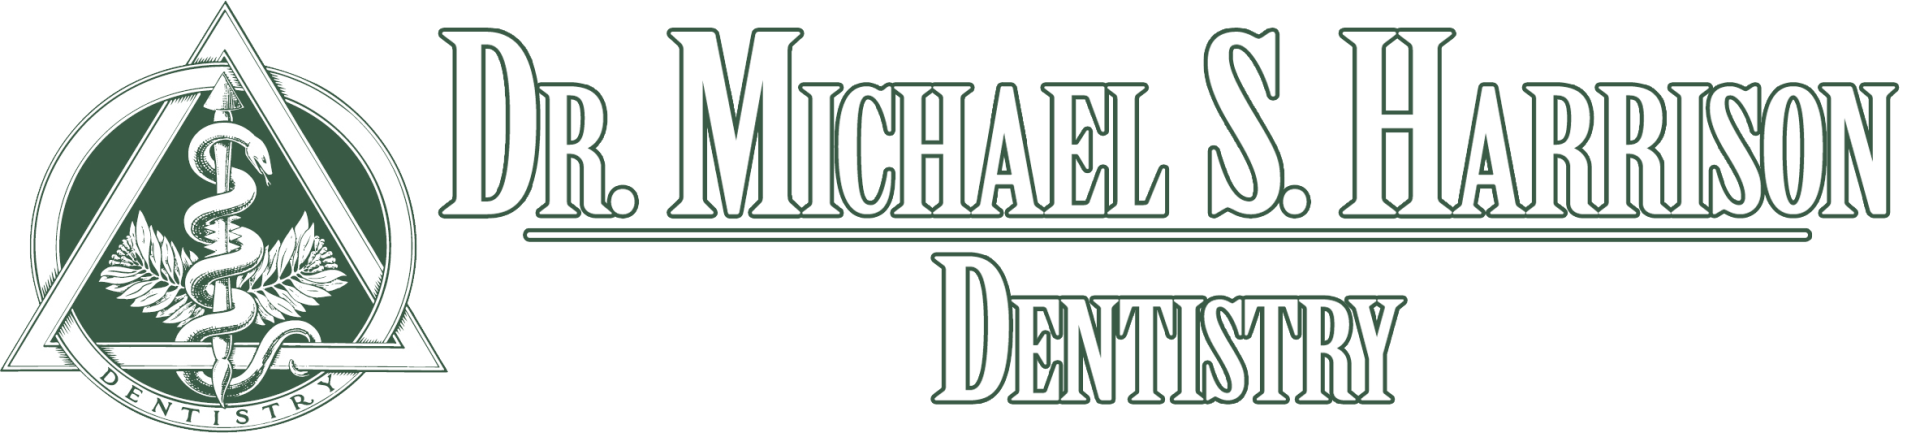 A logo for dr. michael s. harrison dentistry